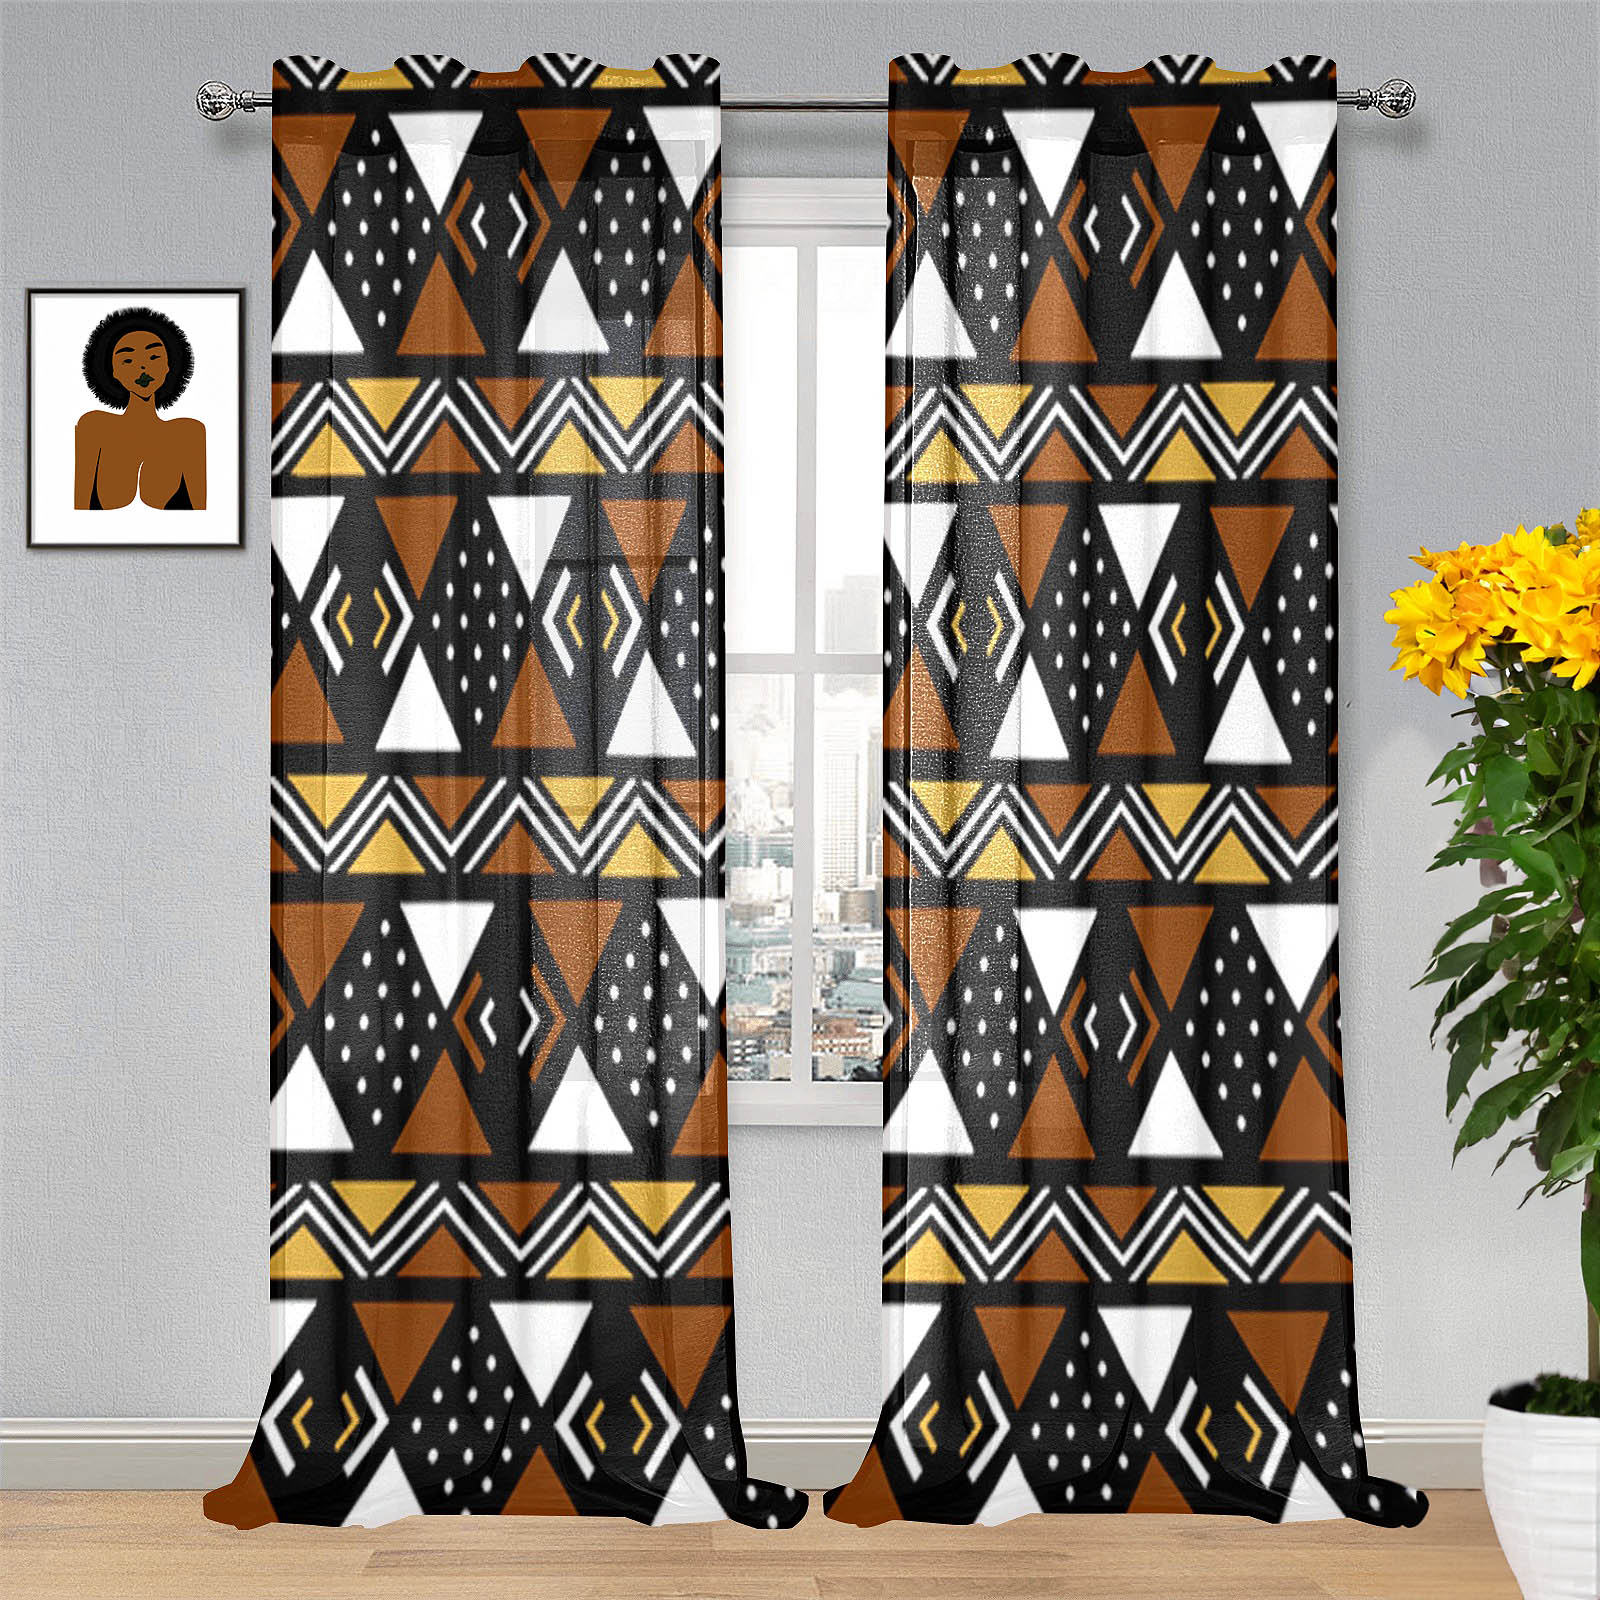 Stripe African Print Guaze Curtain Mudcloth (Two Piece)- Bynelo